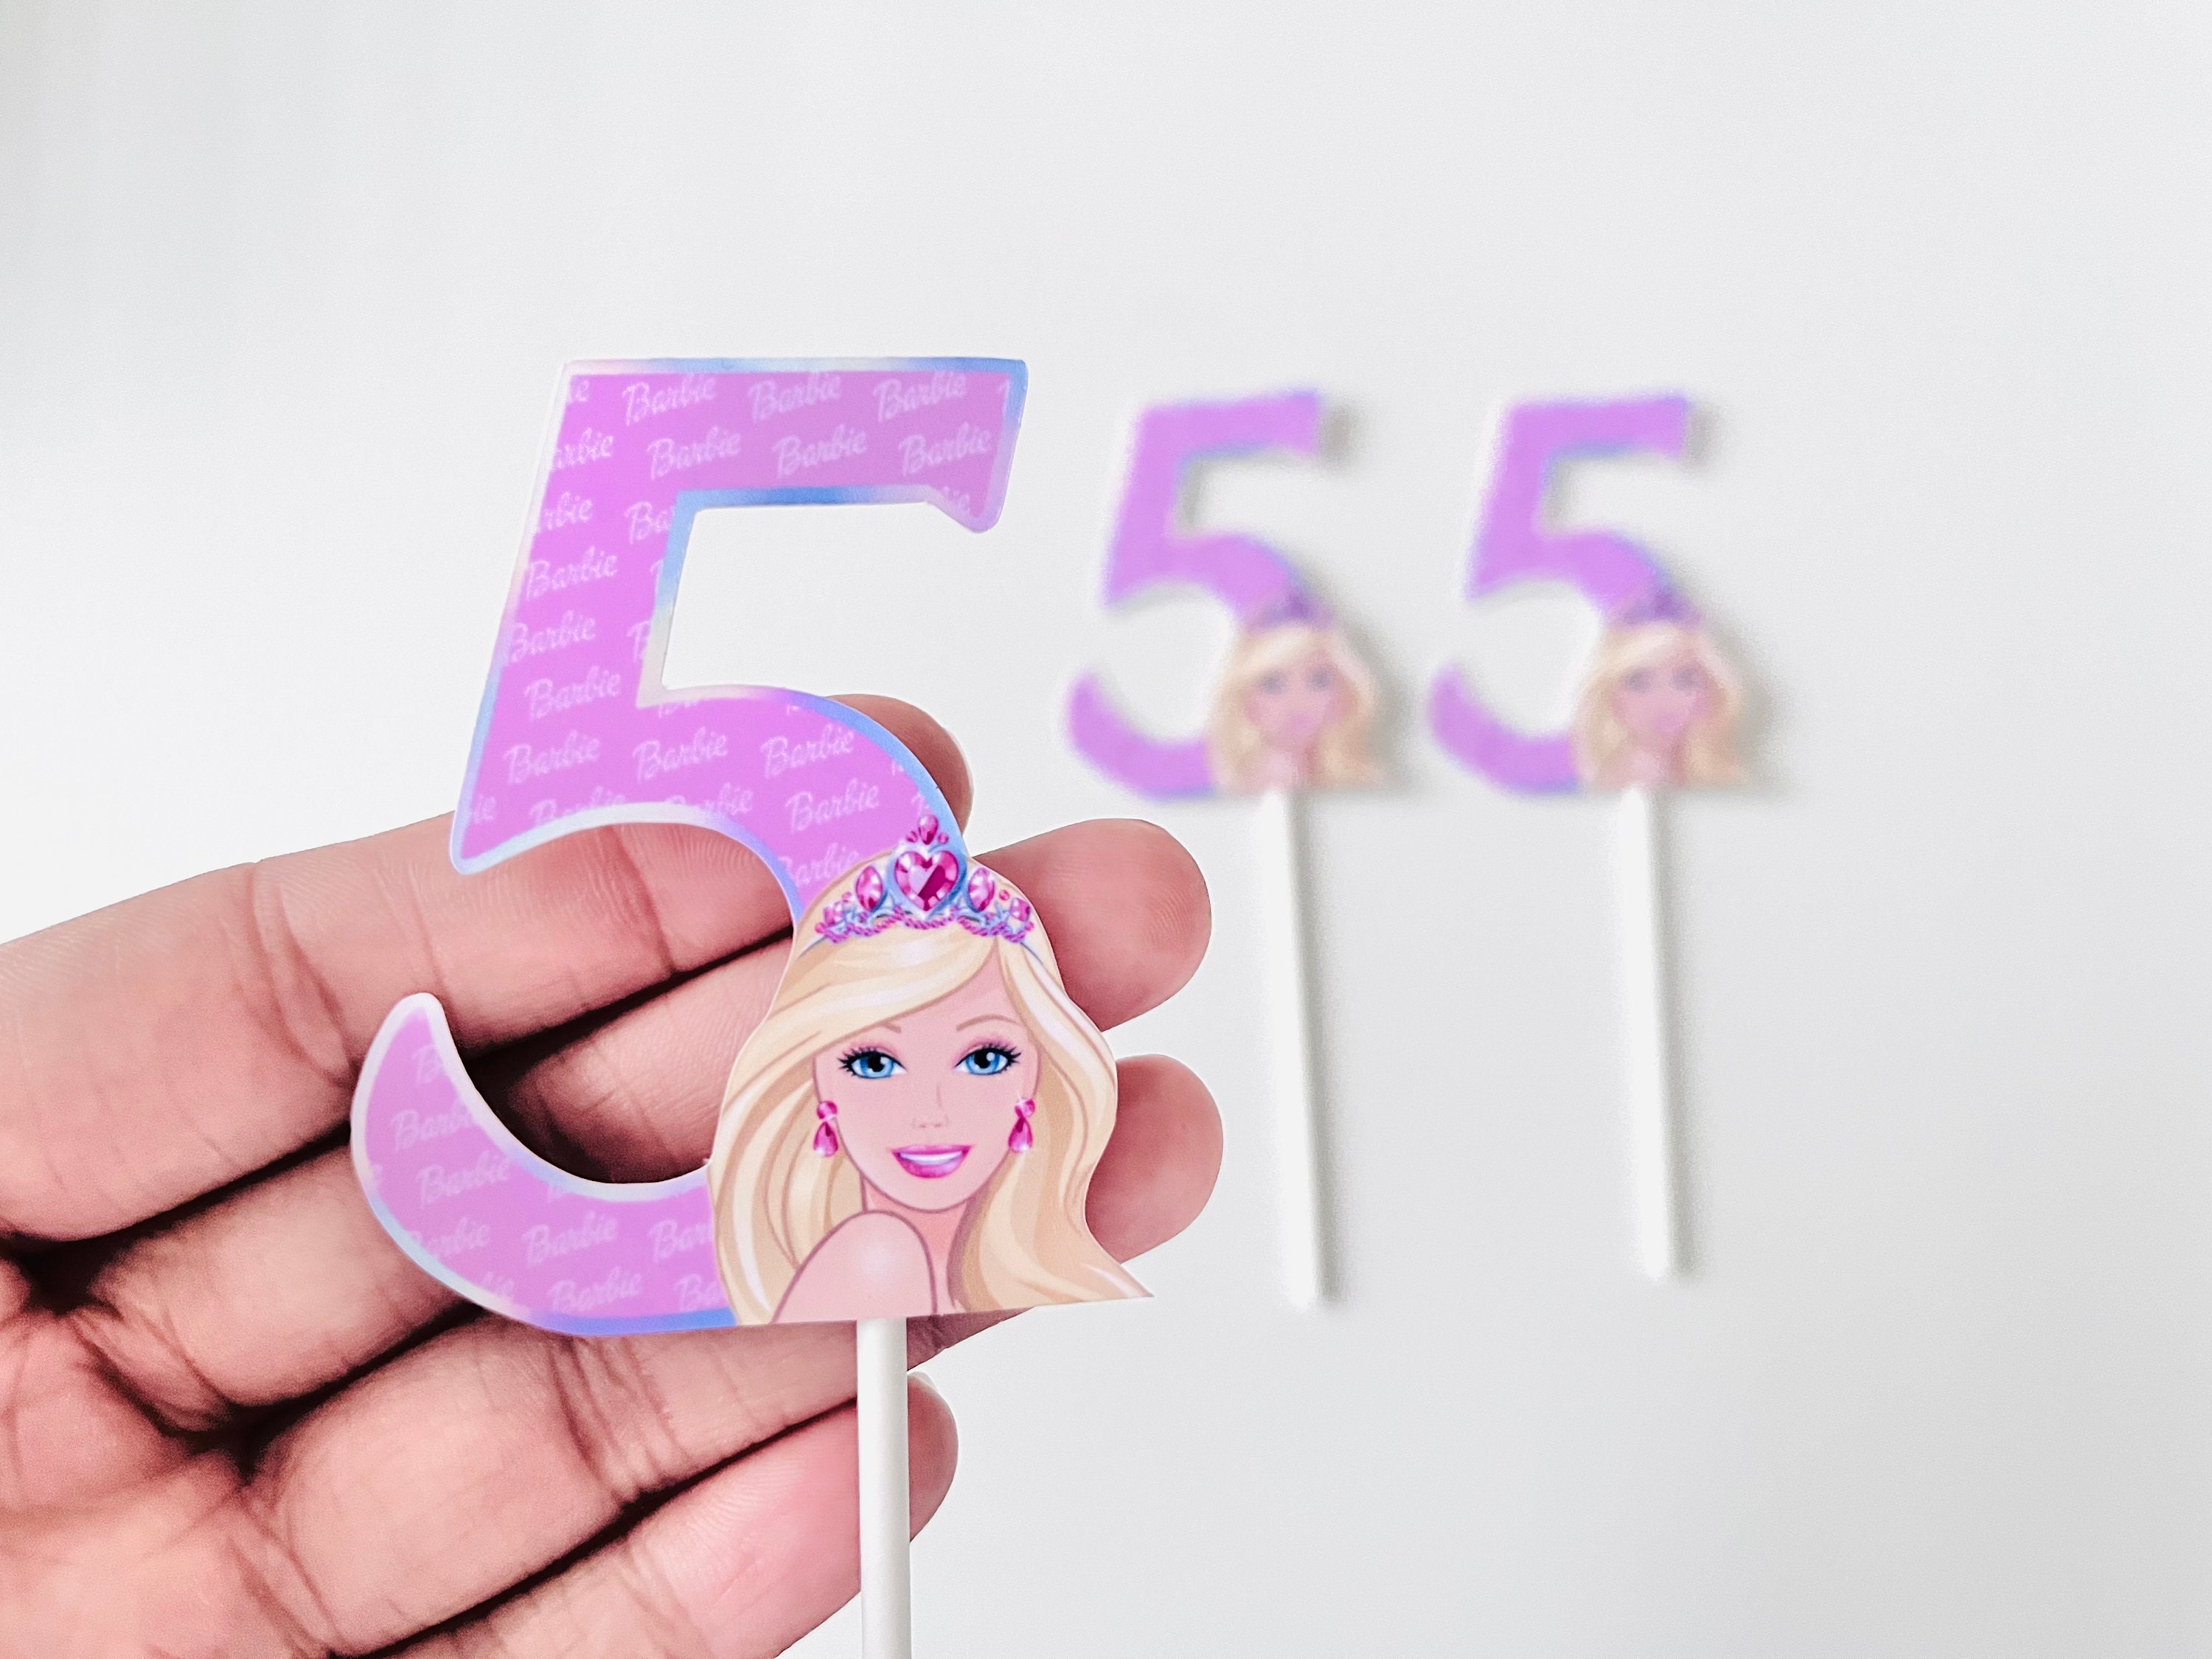 Barbie Cupcake Toppers (with Images) C34  Barbie decorations, Barbie  birthday party, Barbie cupcakes